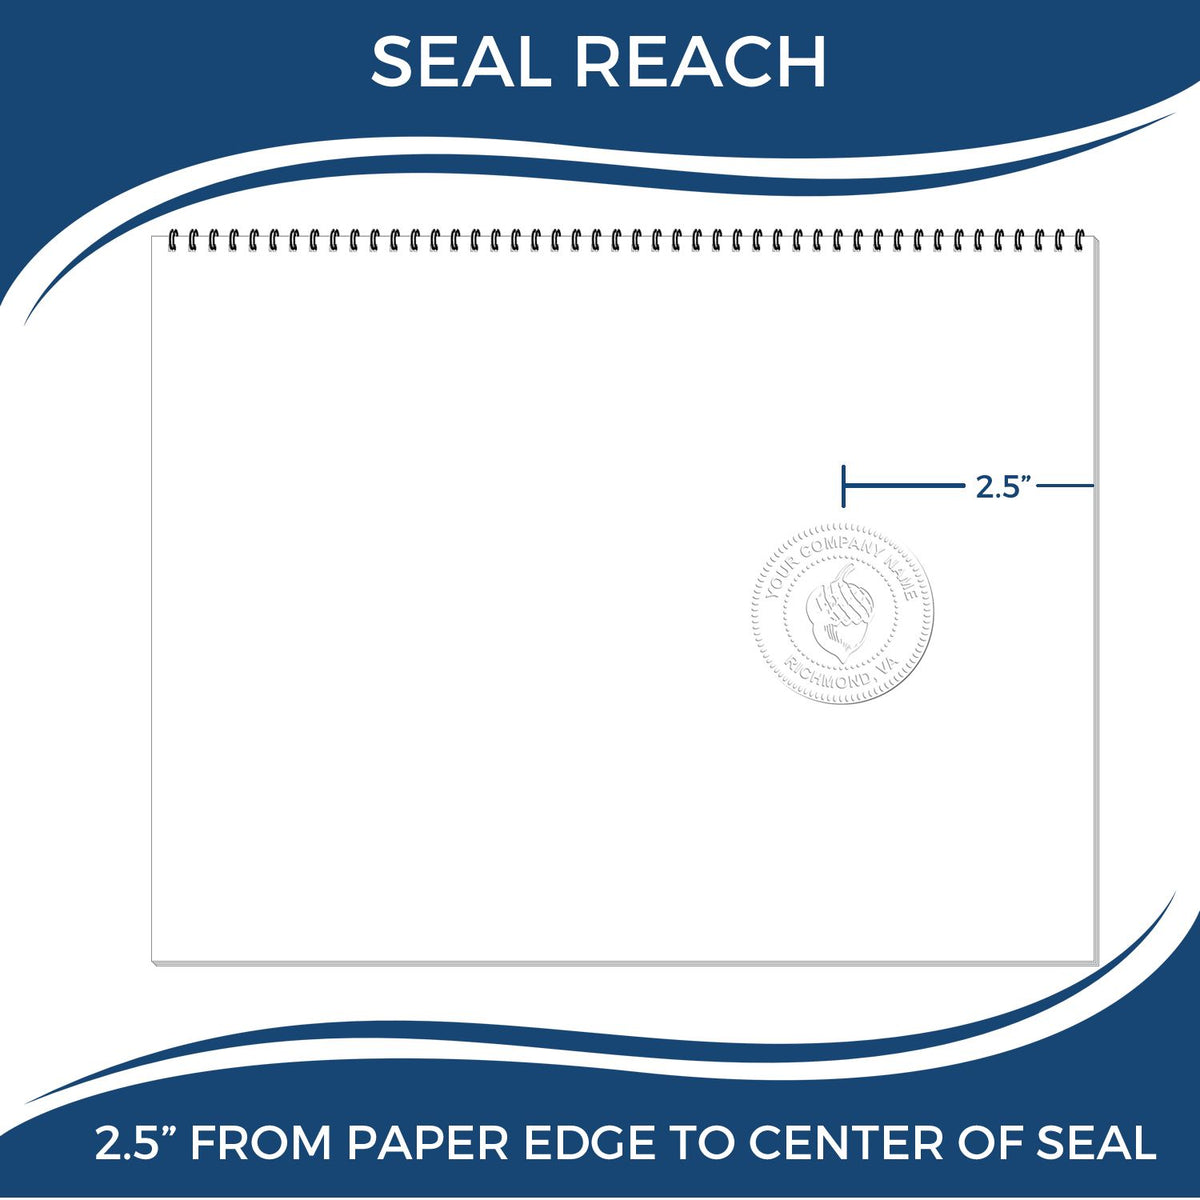 An infographic showing the seal reach which is represented by a ruler and a miniature seal image of the Heavy Duty Cast Iron Illinois Geologist Seal Embosser